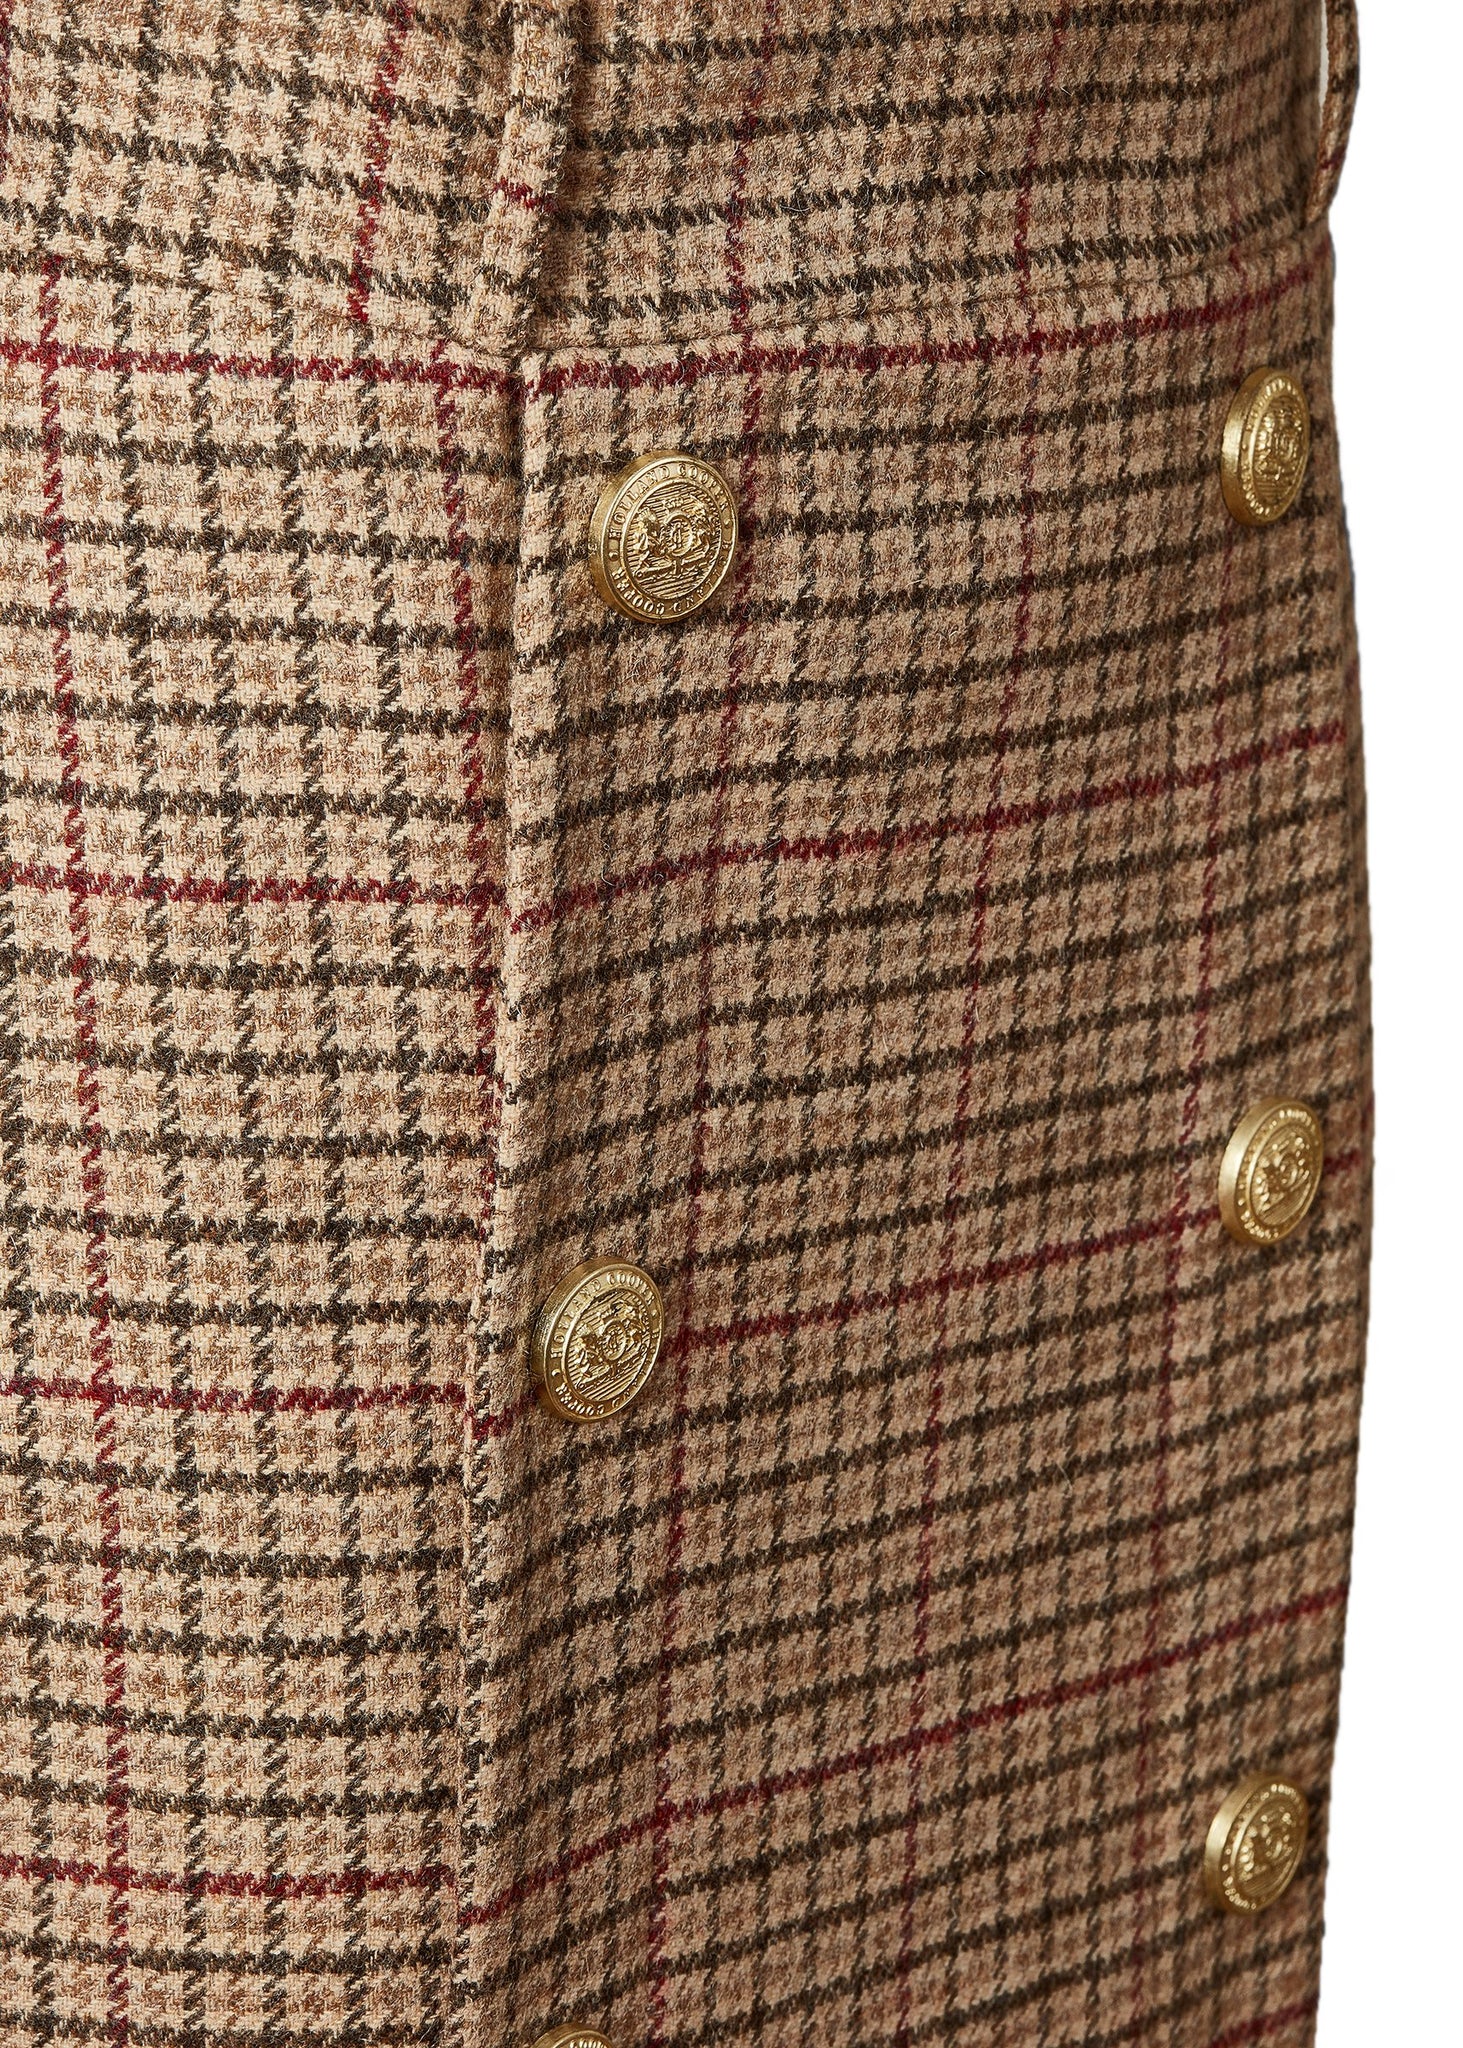 gold button front detail of womens wool pencil mini skirt in light brown and red tweed check with concealed zip fastening on centre back